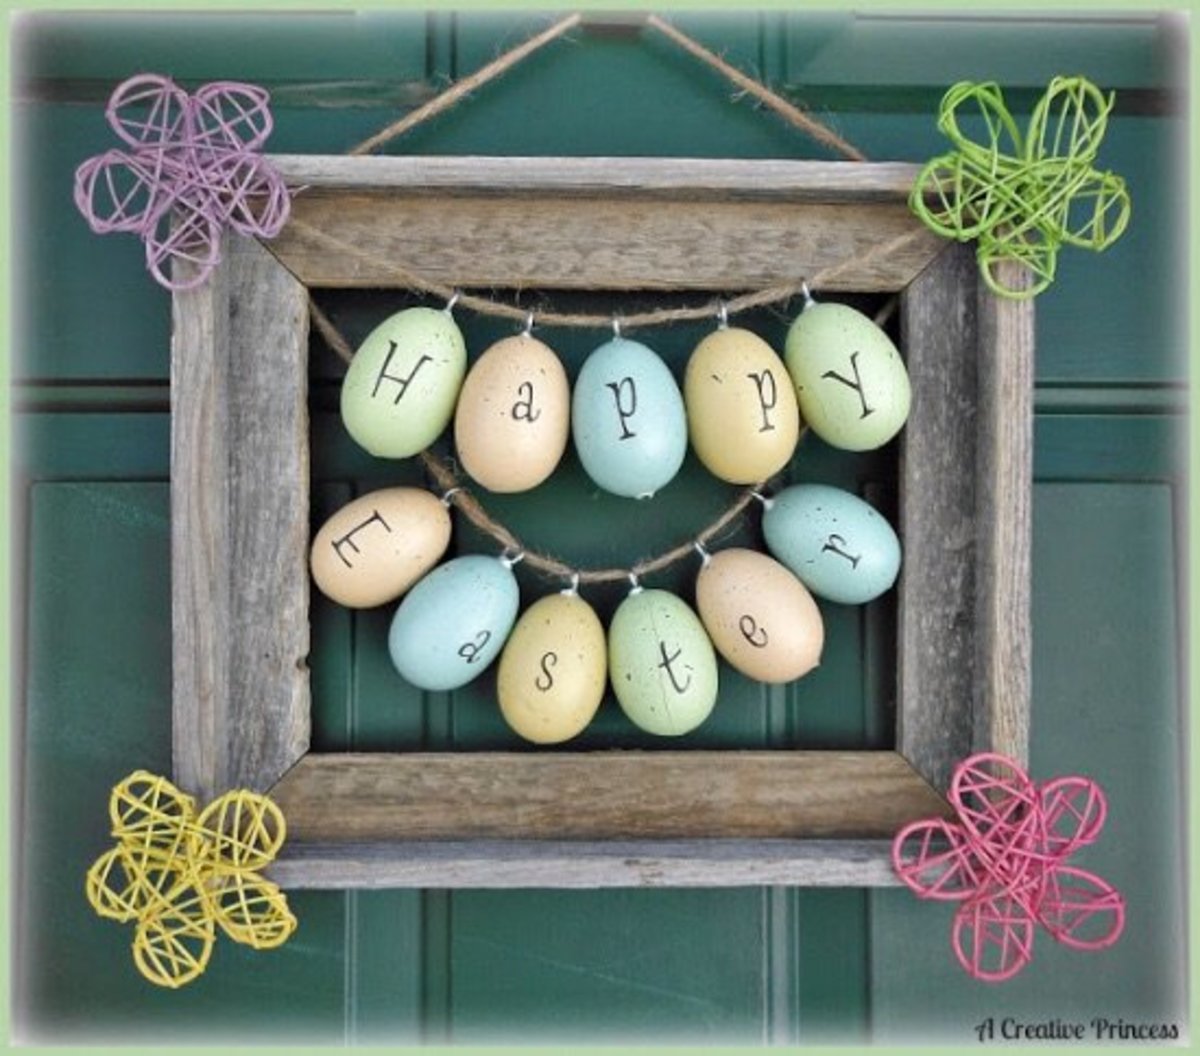 12 Stunning DIY Easter Decorations to Brighten Your Home